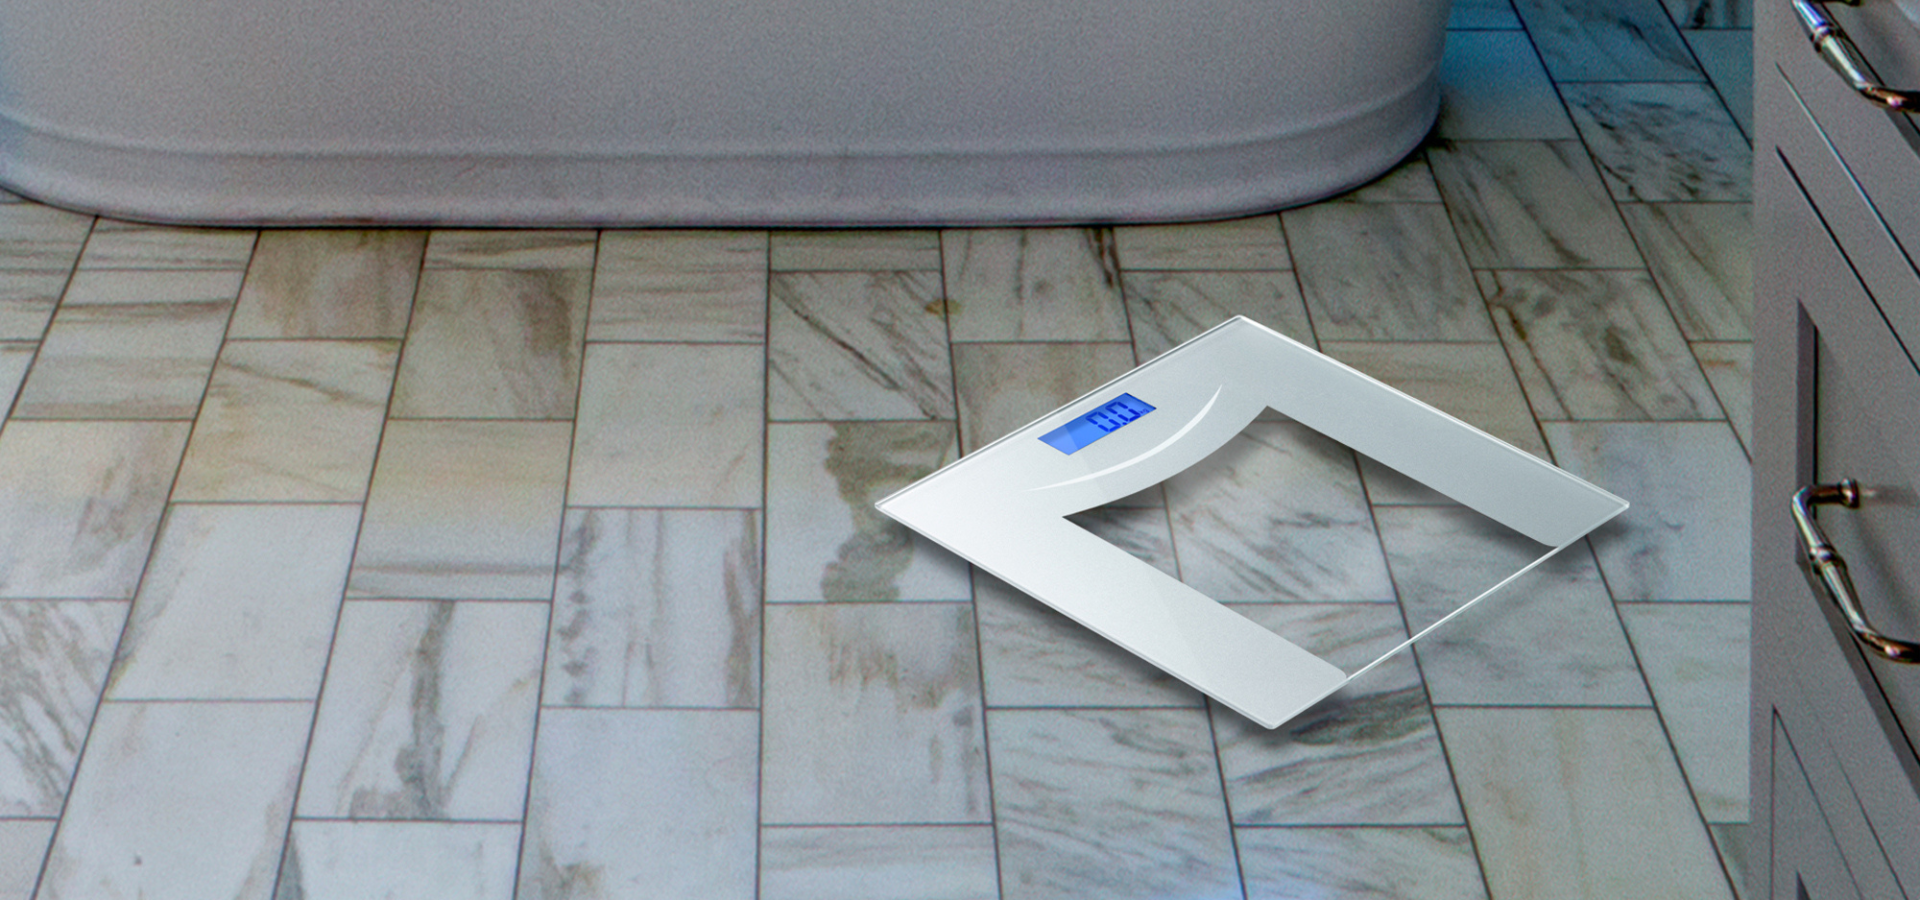 Experience Precision and Style with Prominence Home Bathroom Scales